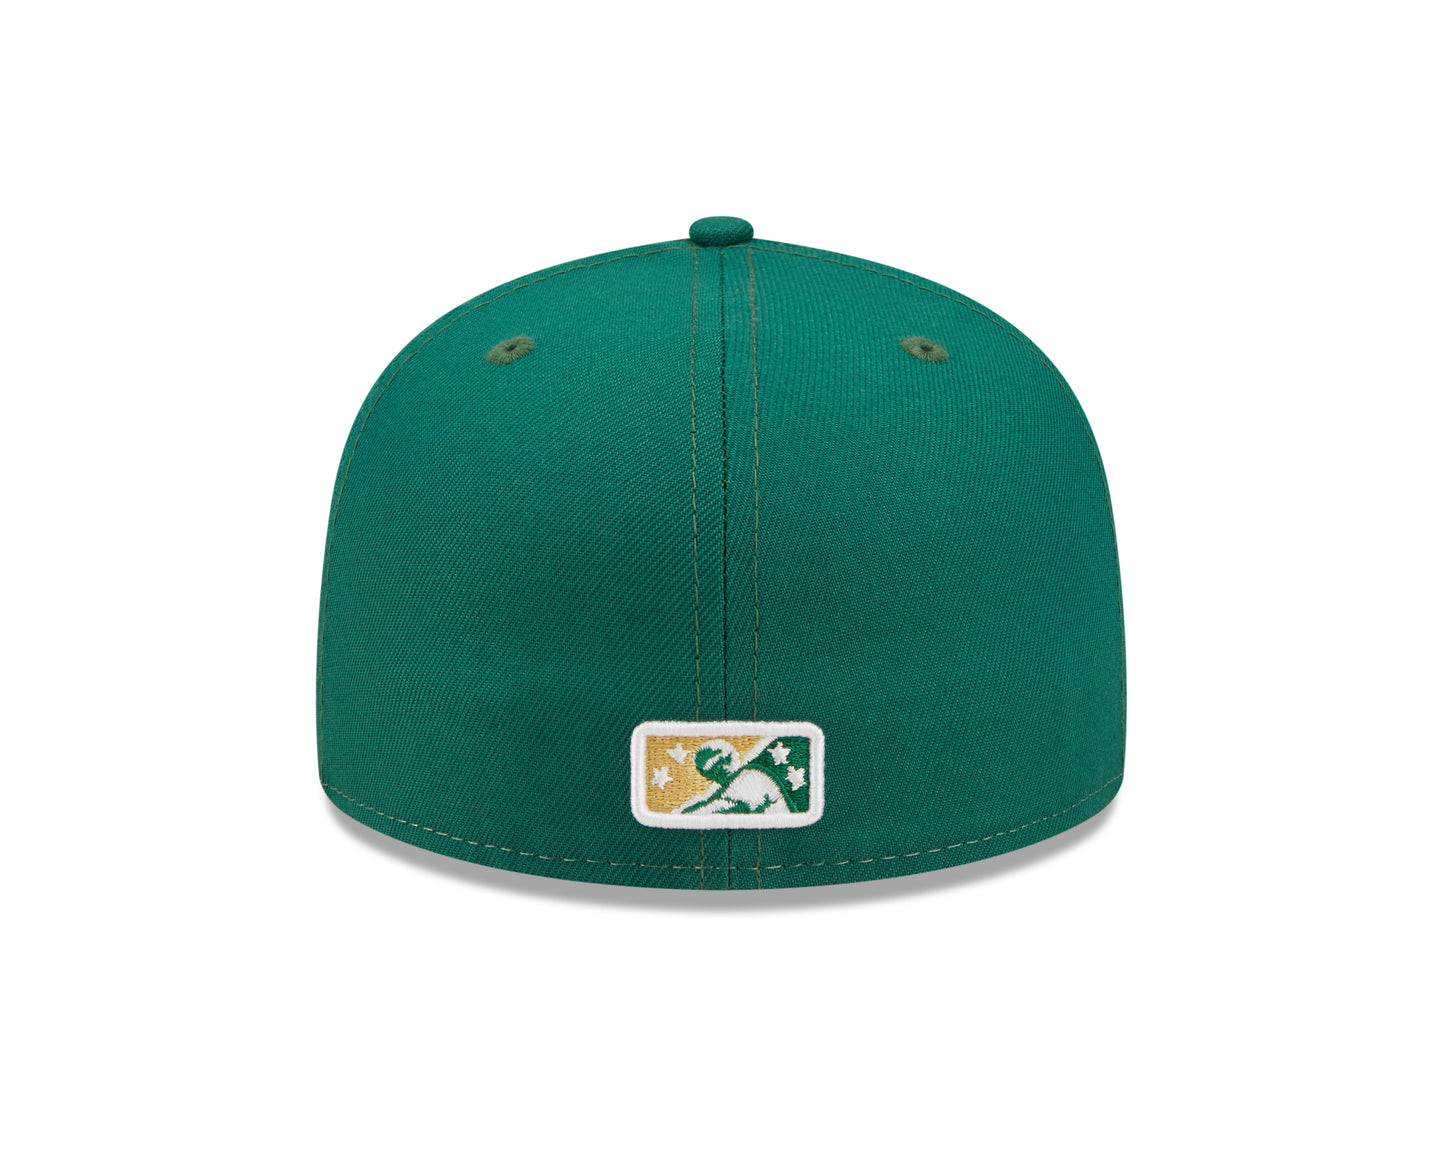 New Era - 59fifty Fitted - MiLB - AC Perf - Augusta Green Jackets - White/Green - Headz Up 